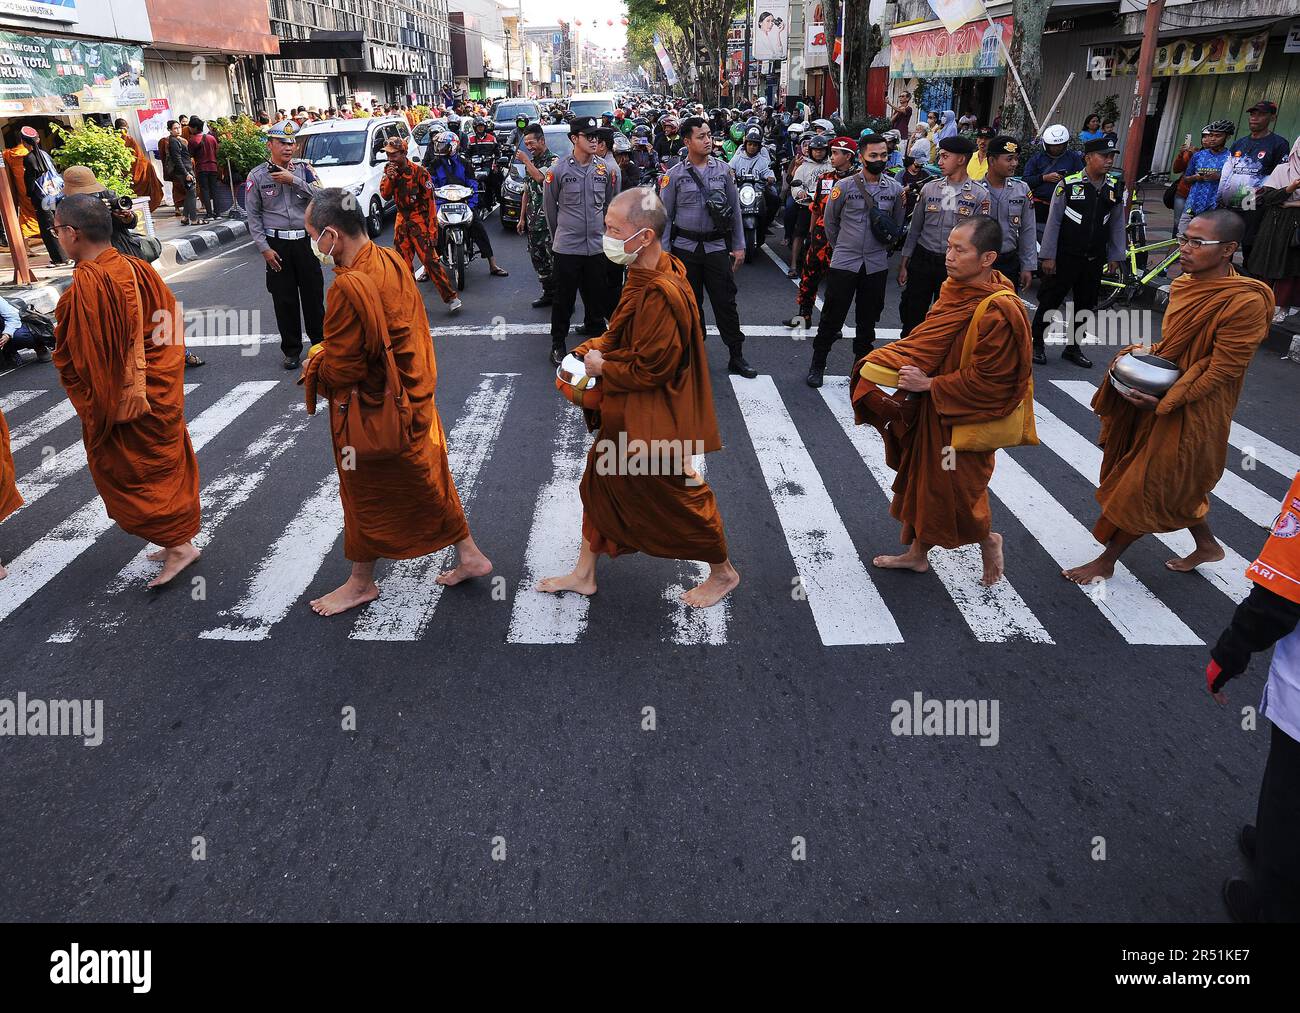 May 31, 2023, Magelang, Central Java, Indonesia: Monks from Thailand, Singapore, Malaysia, and Indonesia who perform the Thudong ritual on foot to Borobudur Temple, go for alms at the Liong Hok Bio Temple in Magelang, Central Java. In Magelang City, the monks received a friendly welcome from the locals. around waiting on the side of the road for the Pindapata tradition which was stopped for 3 years, Pindapata is a Buddhist tradition of giving alms to monks or priests in the form of food, money, and various daily needs. The 32 monks are scheduled to continue their final journey to Borobudur Tem Stock Photo